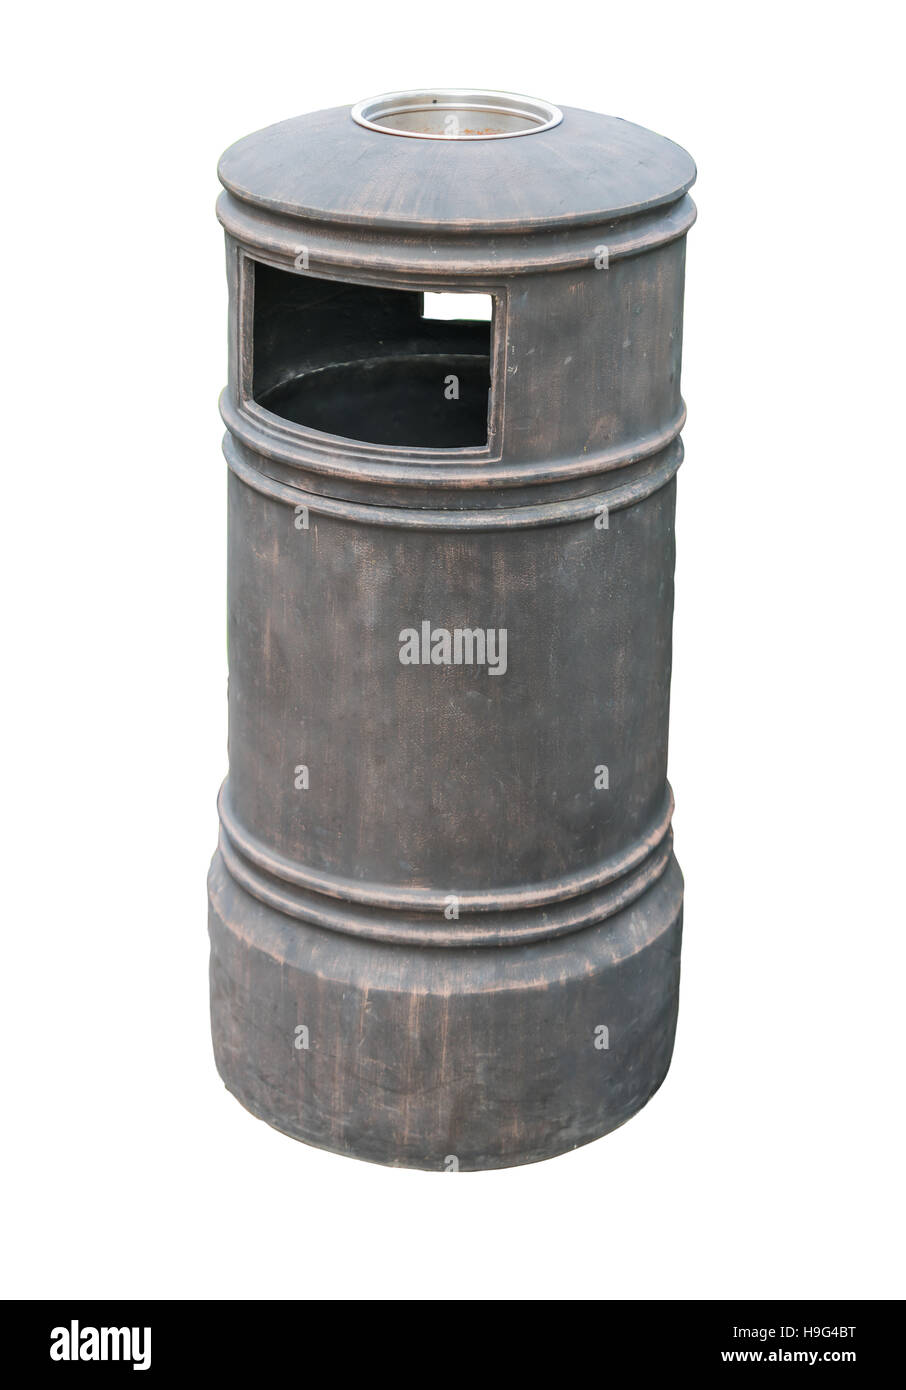 Trash can with ash tray white metal clipping path Stock Photo